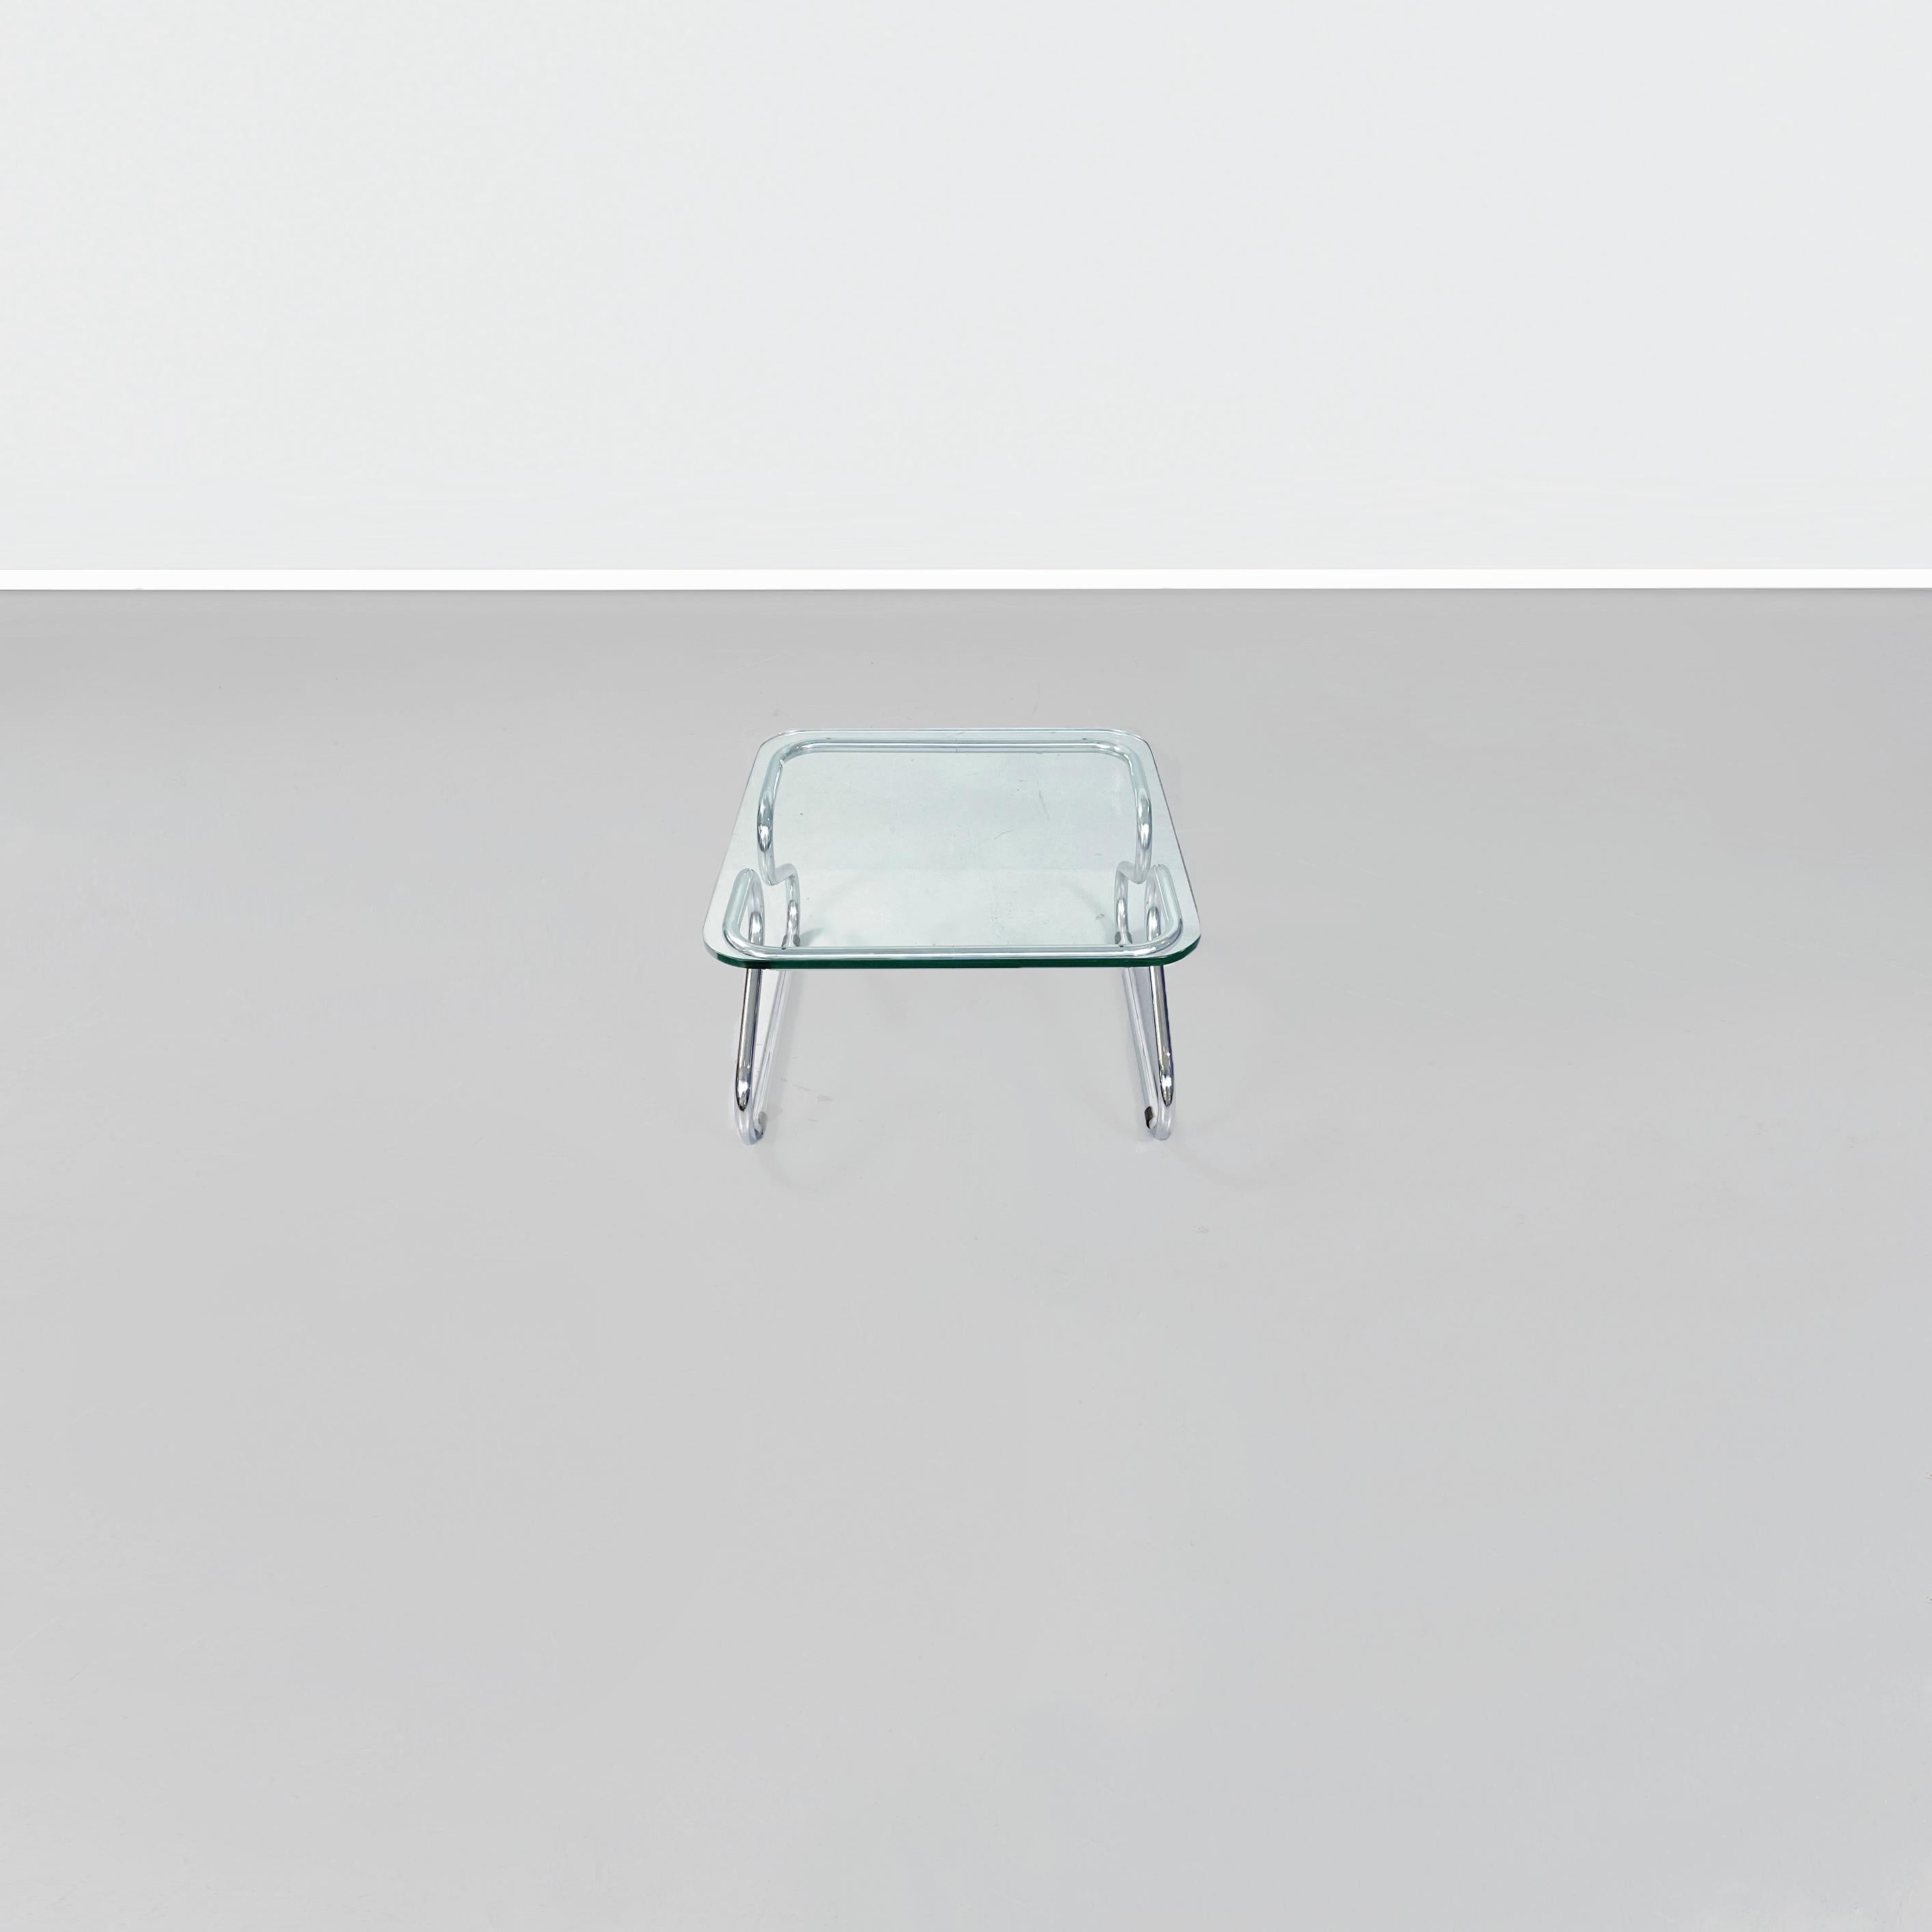 Late 20th Century Italian Mid-Century Coffee Table in Glass and Steel, 1970s For Sale